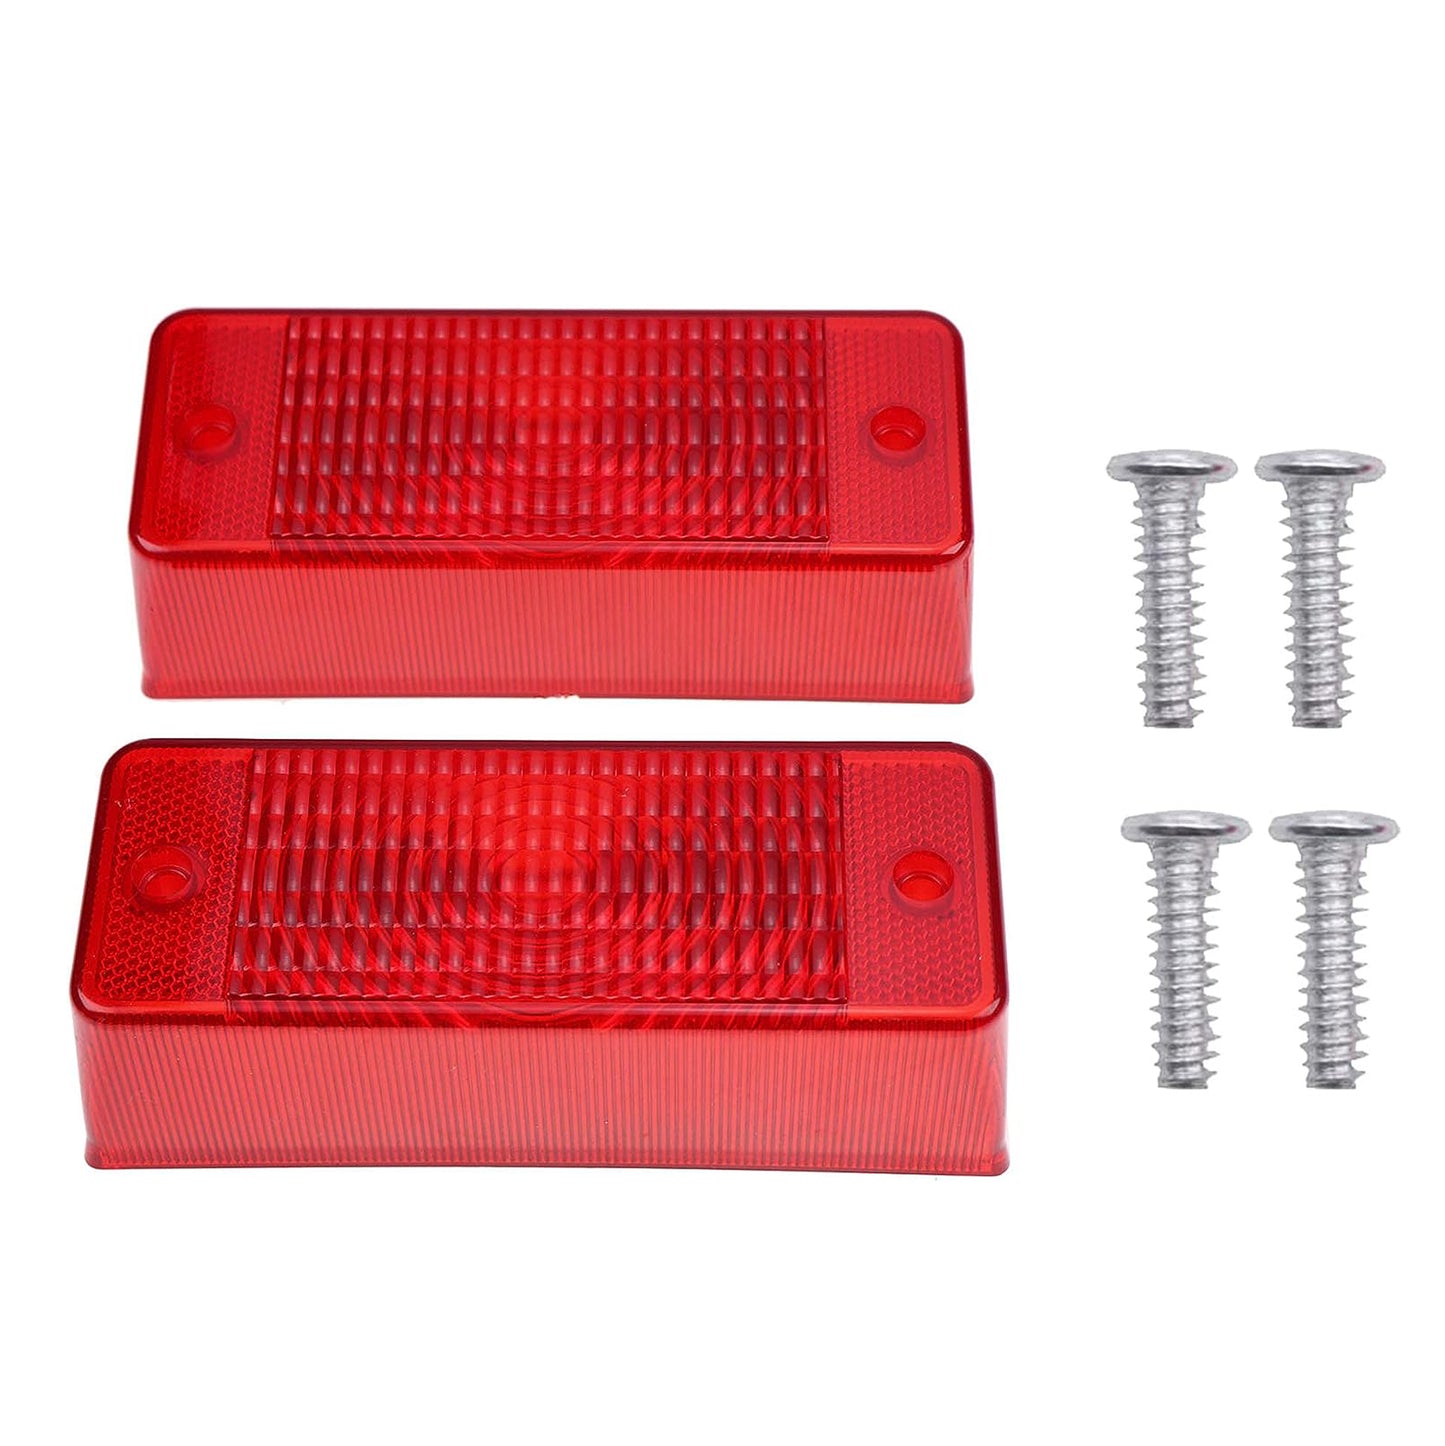 6672276 Rear Tail Light Lens Compatible with Bobcat 553 751 753 763 773 863 864 873 883 963